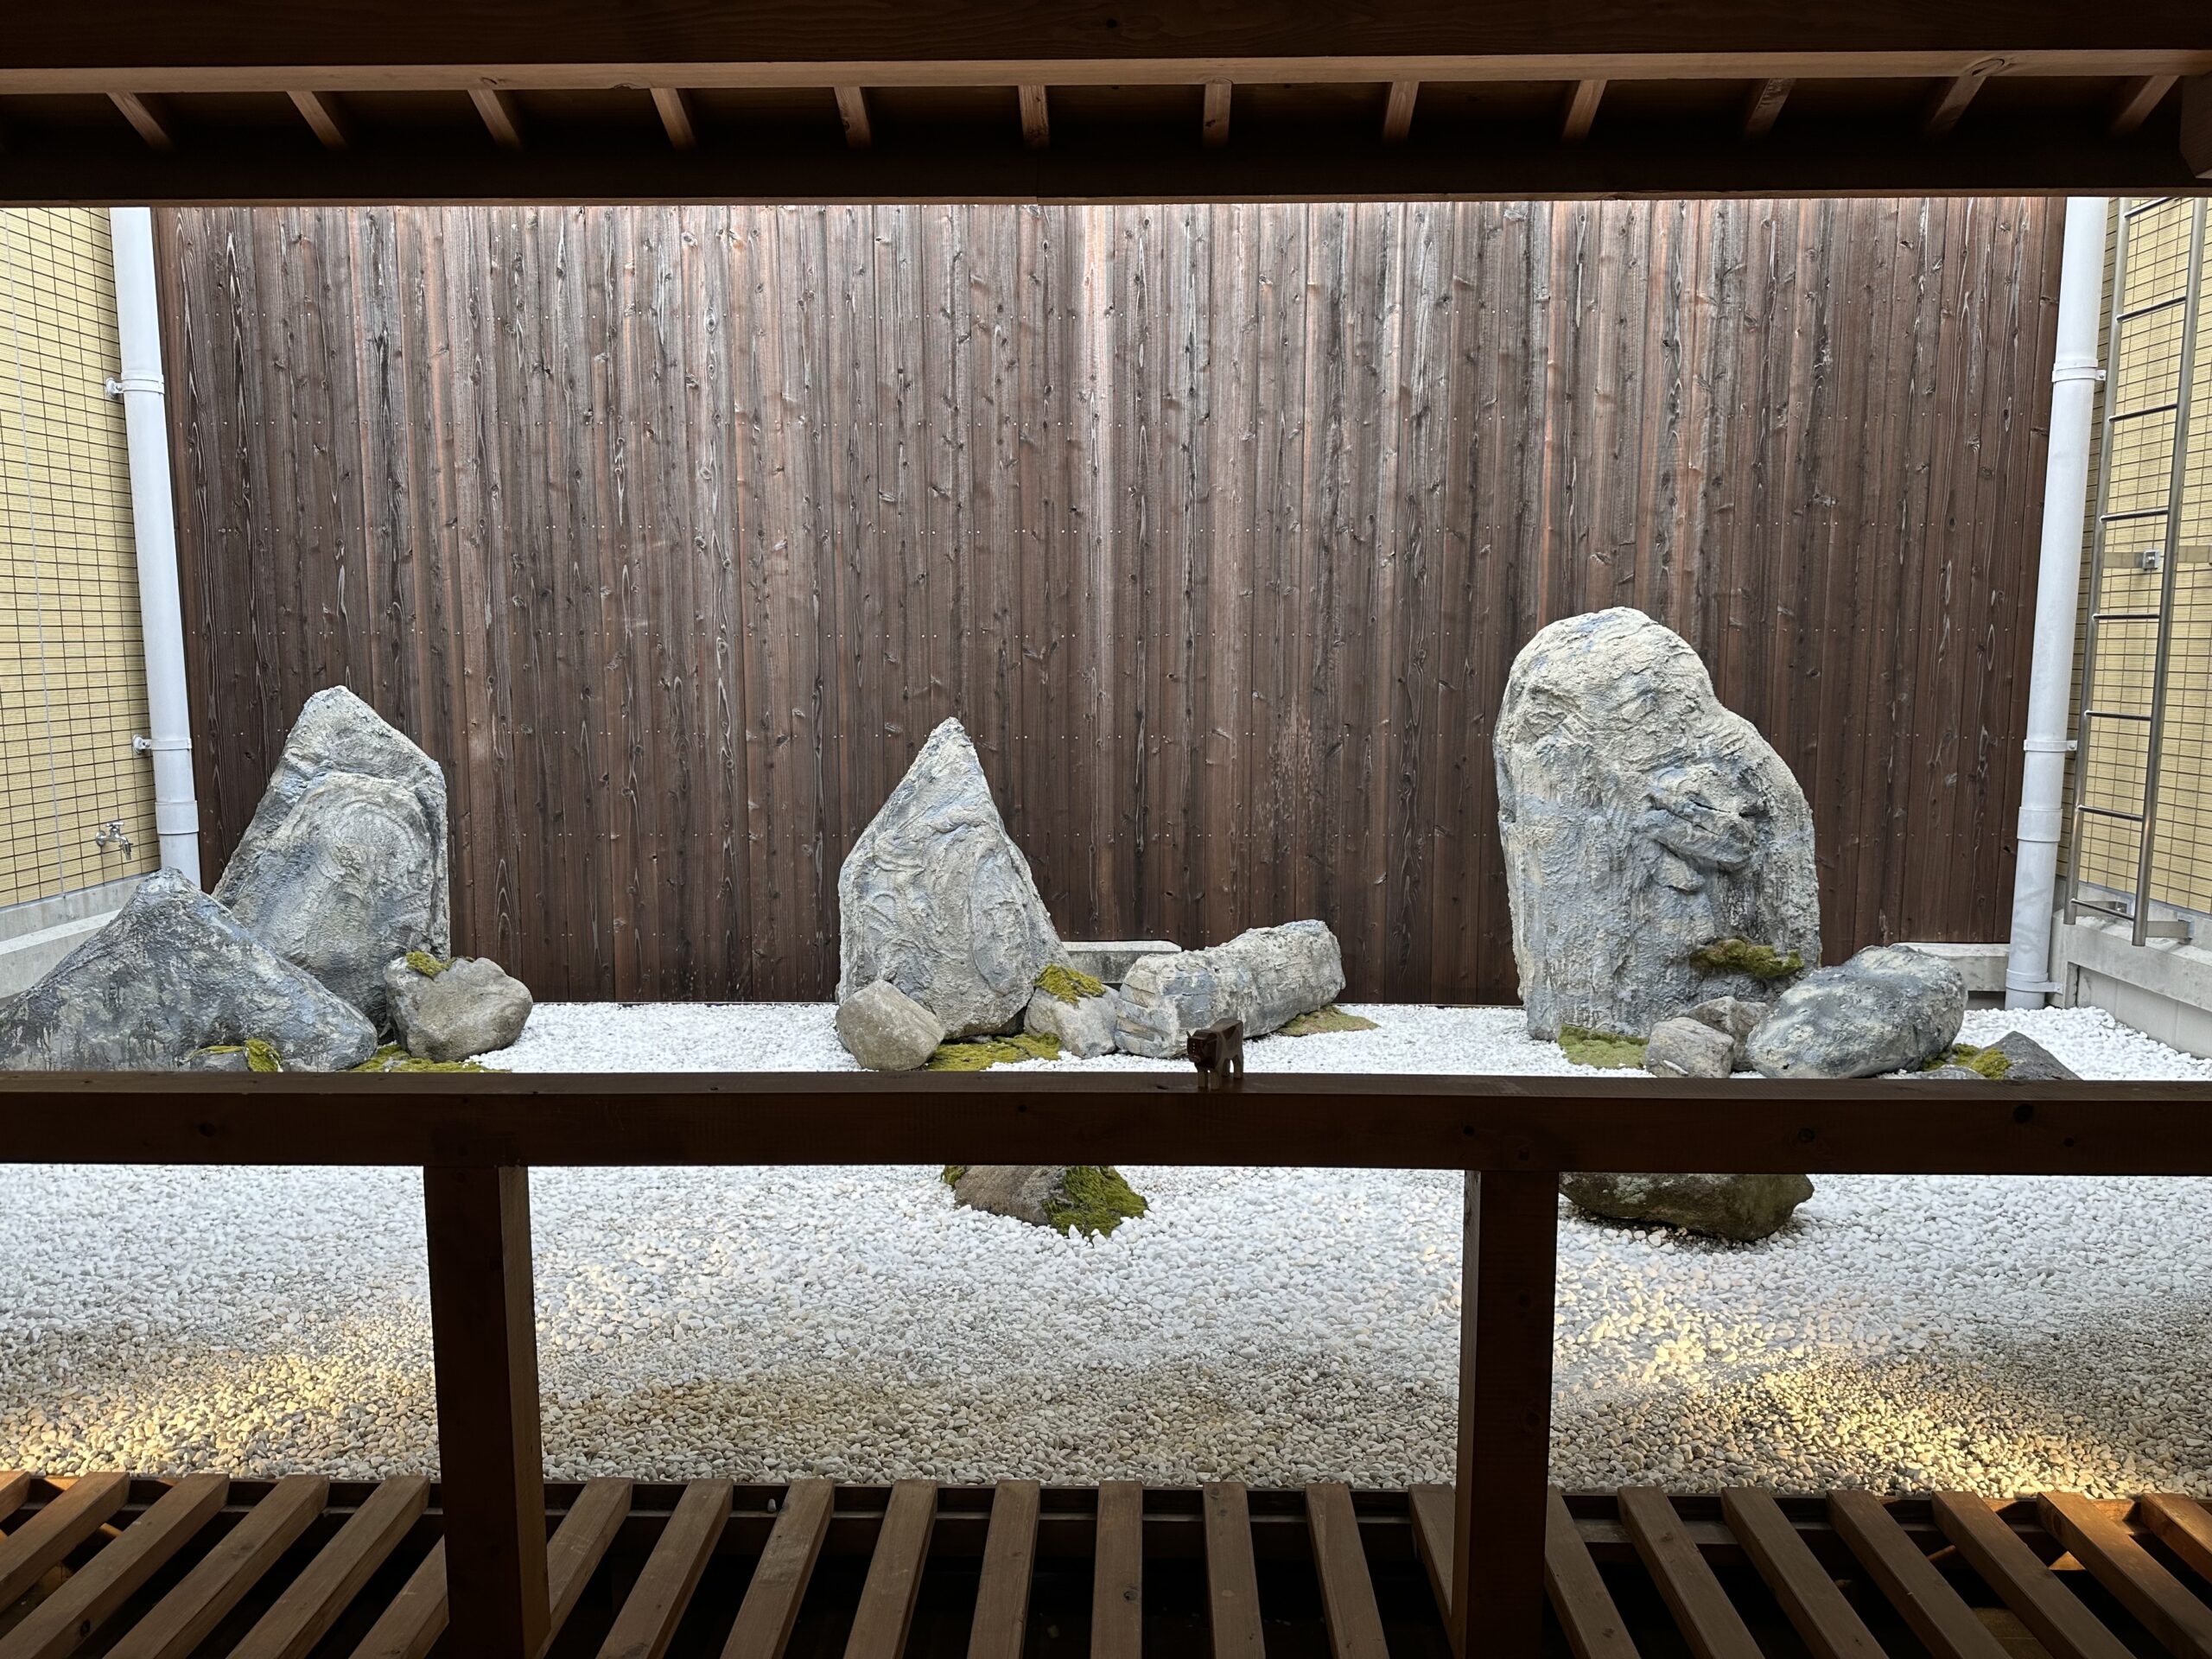 They even had a tiny Zen garden next to the lounge, which was very much enjoyed by Muni!